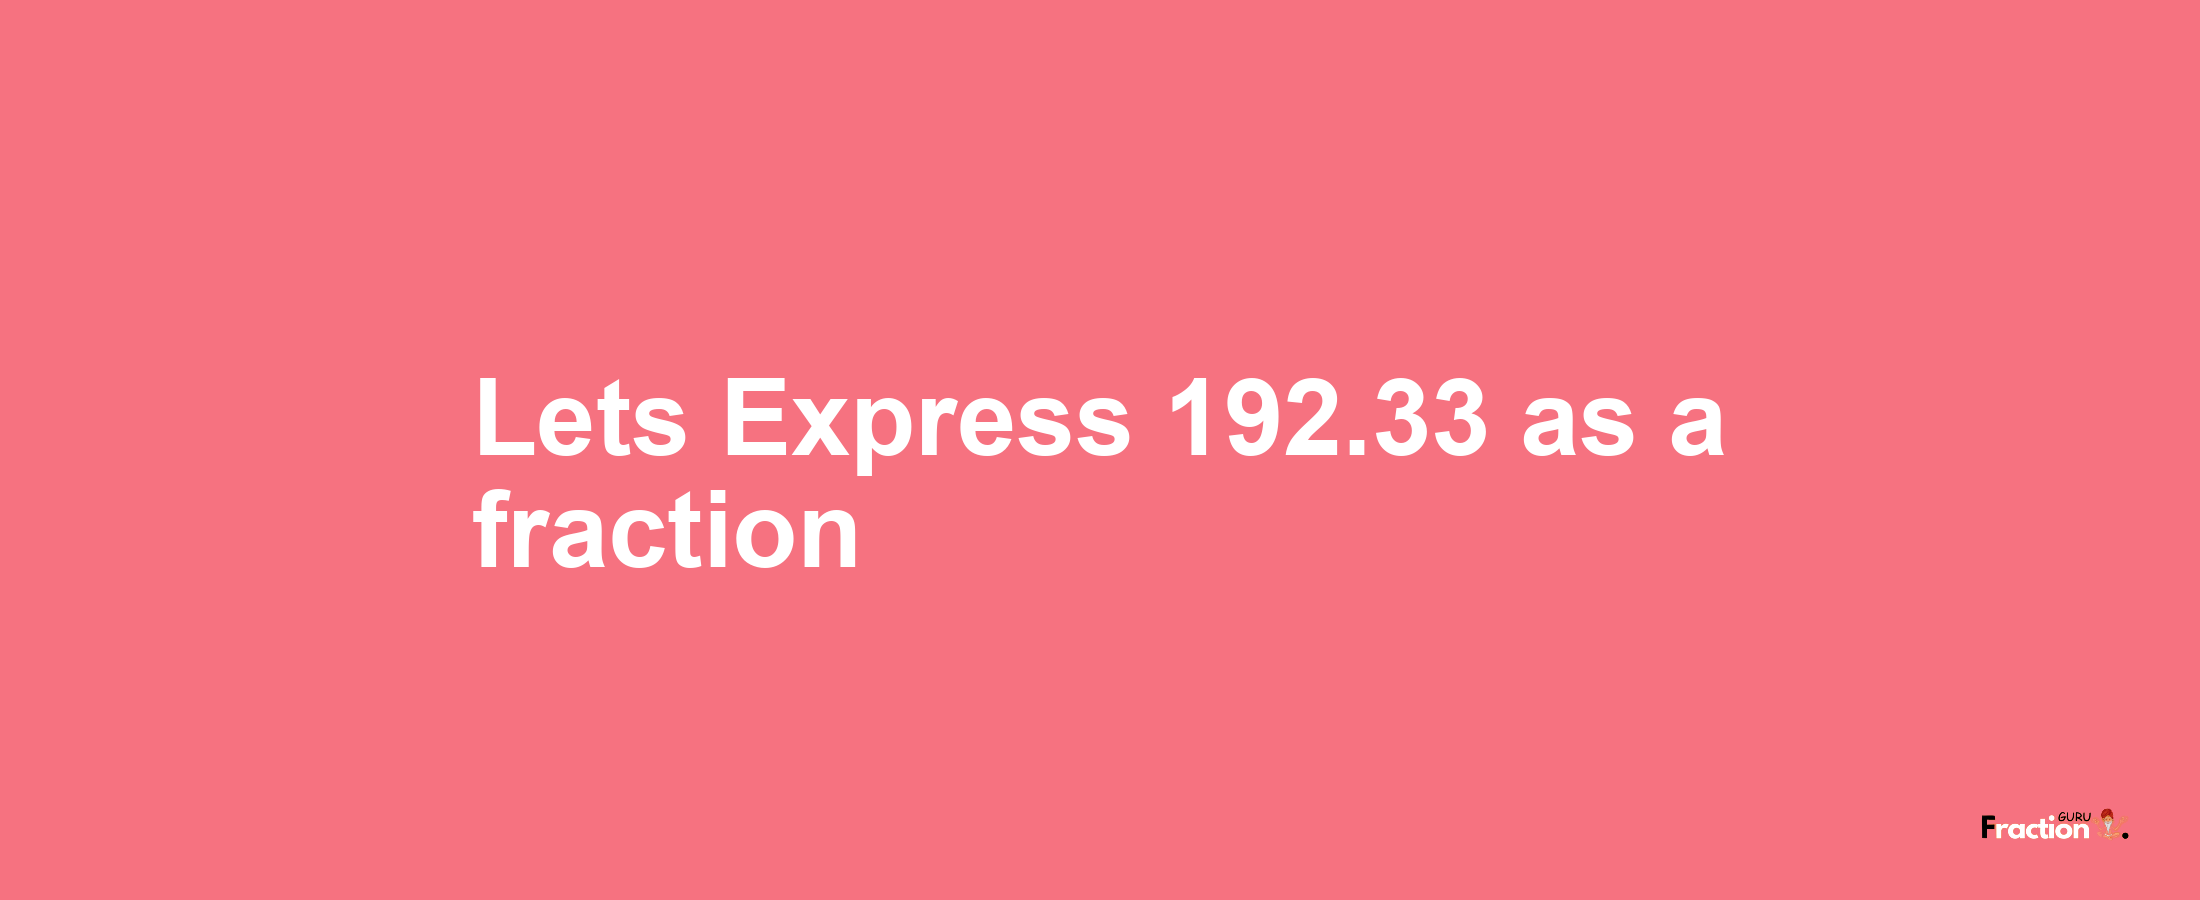 Lets Express 192.33 as afraction